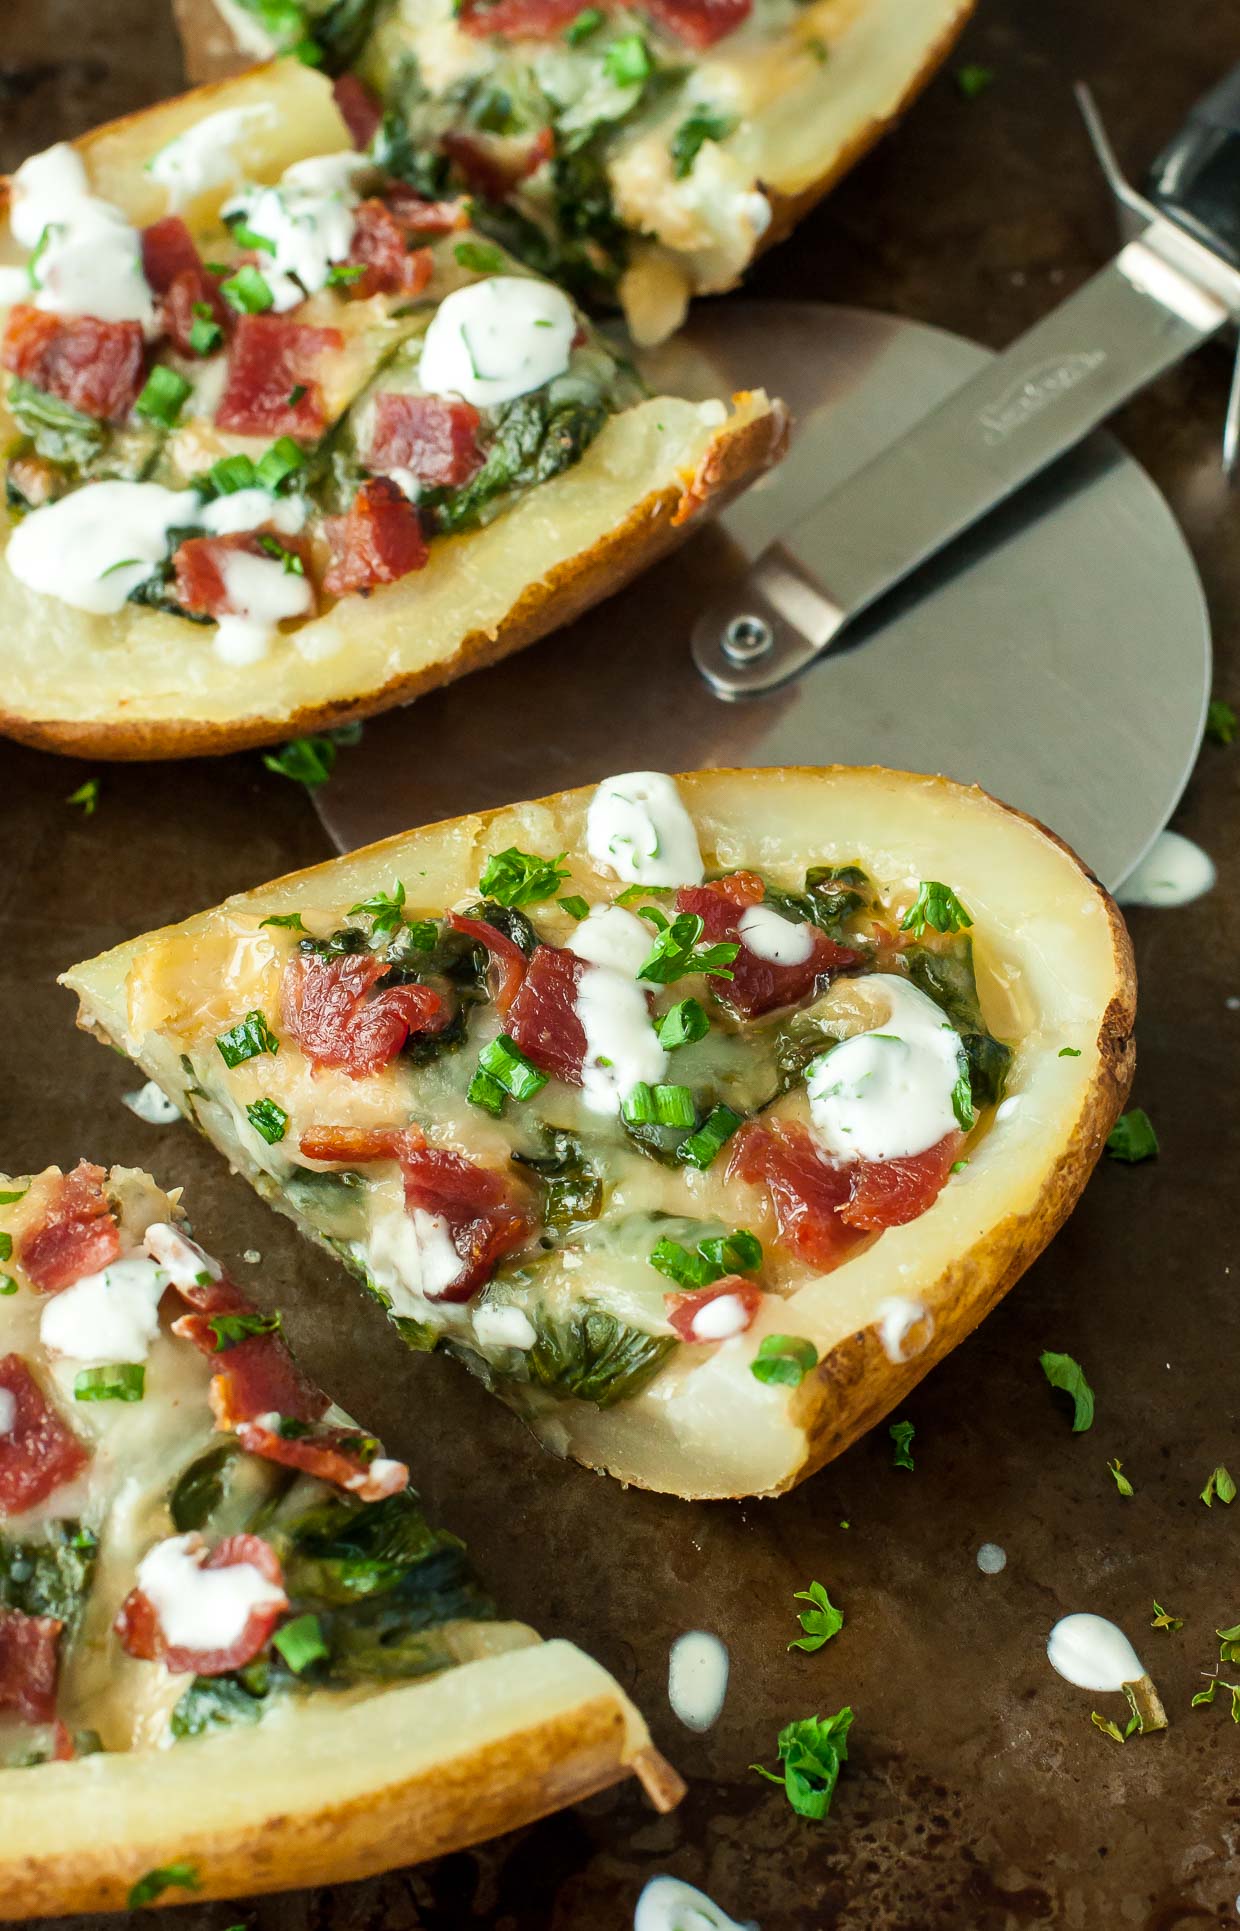 Creamy spinach artichoke dip and crispy loaded baked potato skins join forces, resulting in the ultimate party appetizer! We LOVE these loaded spinach artichoke potato skins!